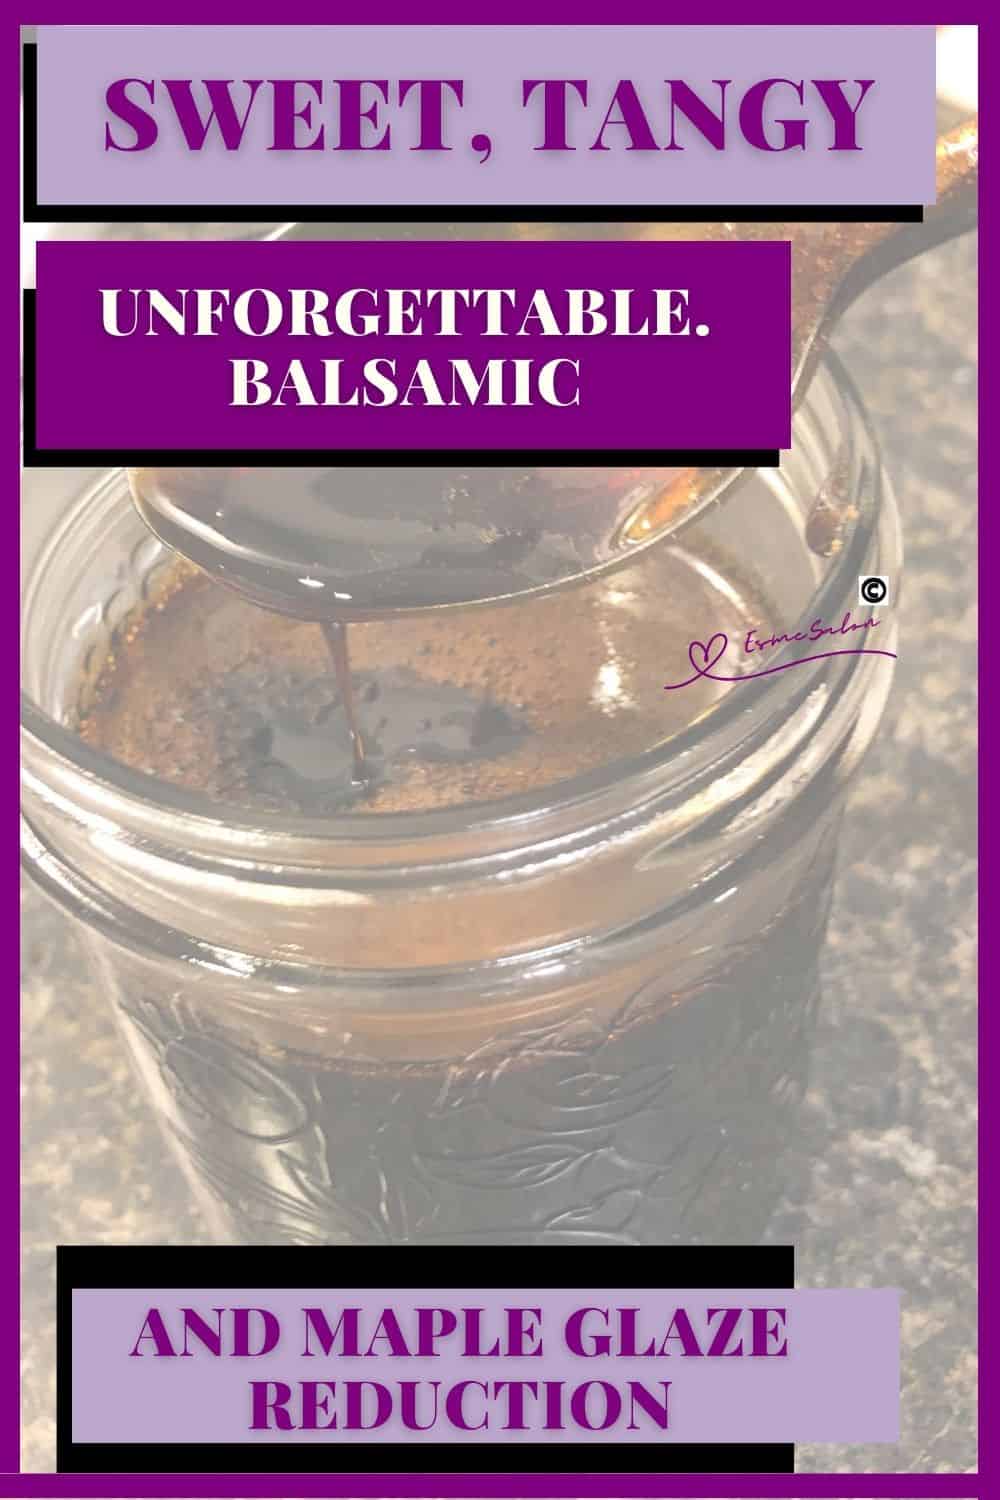 an image of a mason jar filled with Balsamic and Maple Glaze Reduction